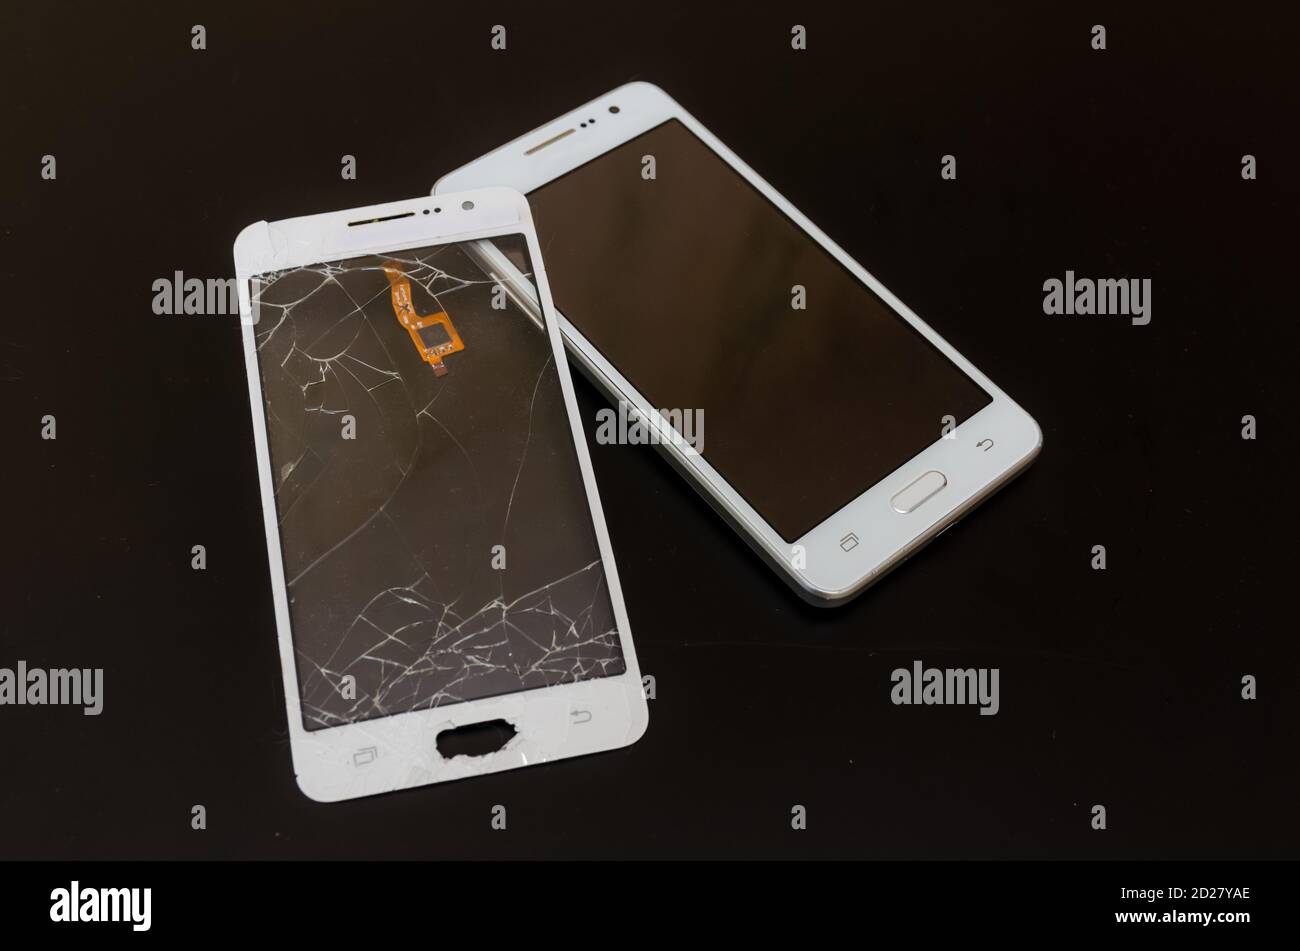 Smartphone after repairing a cracked touch screen. Nearby is a cracked touch screen. Black background with copy space. Stock Photo